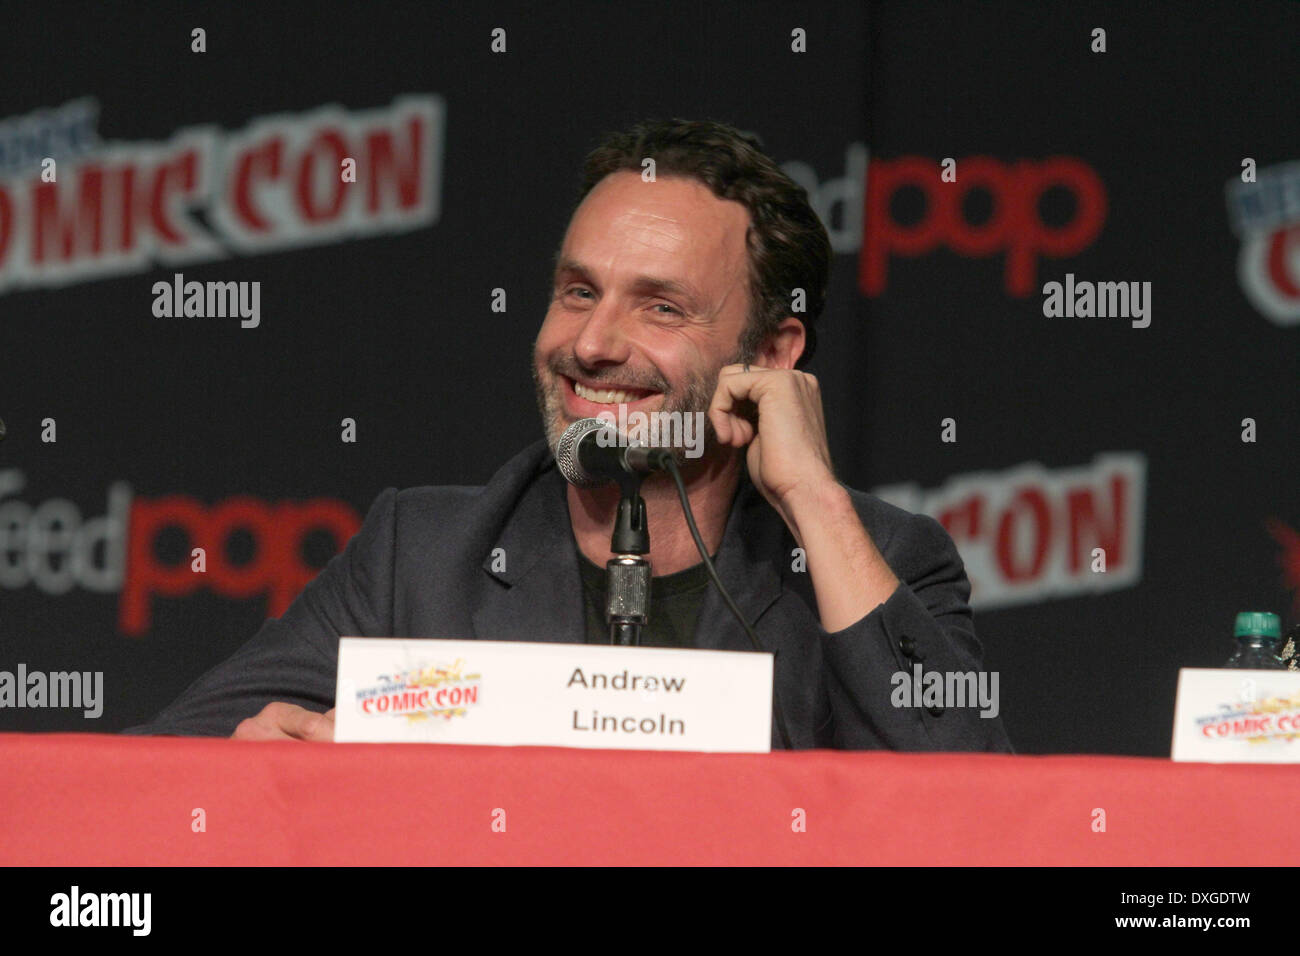 Andrew Lincoln Comic Con New York held at the Jacob Javits Convention